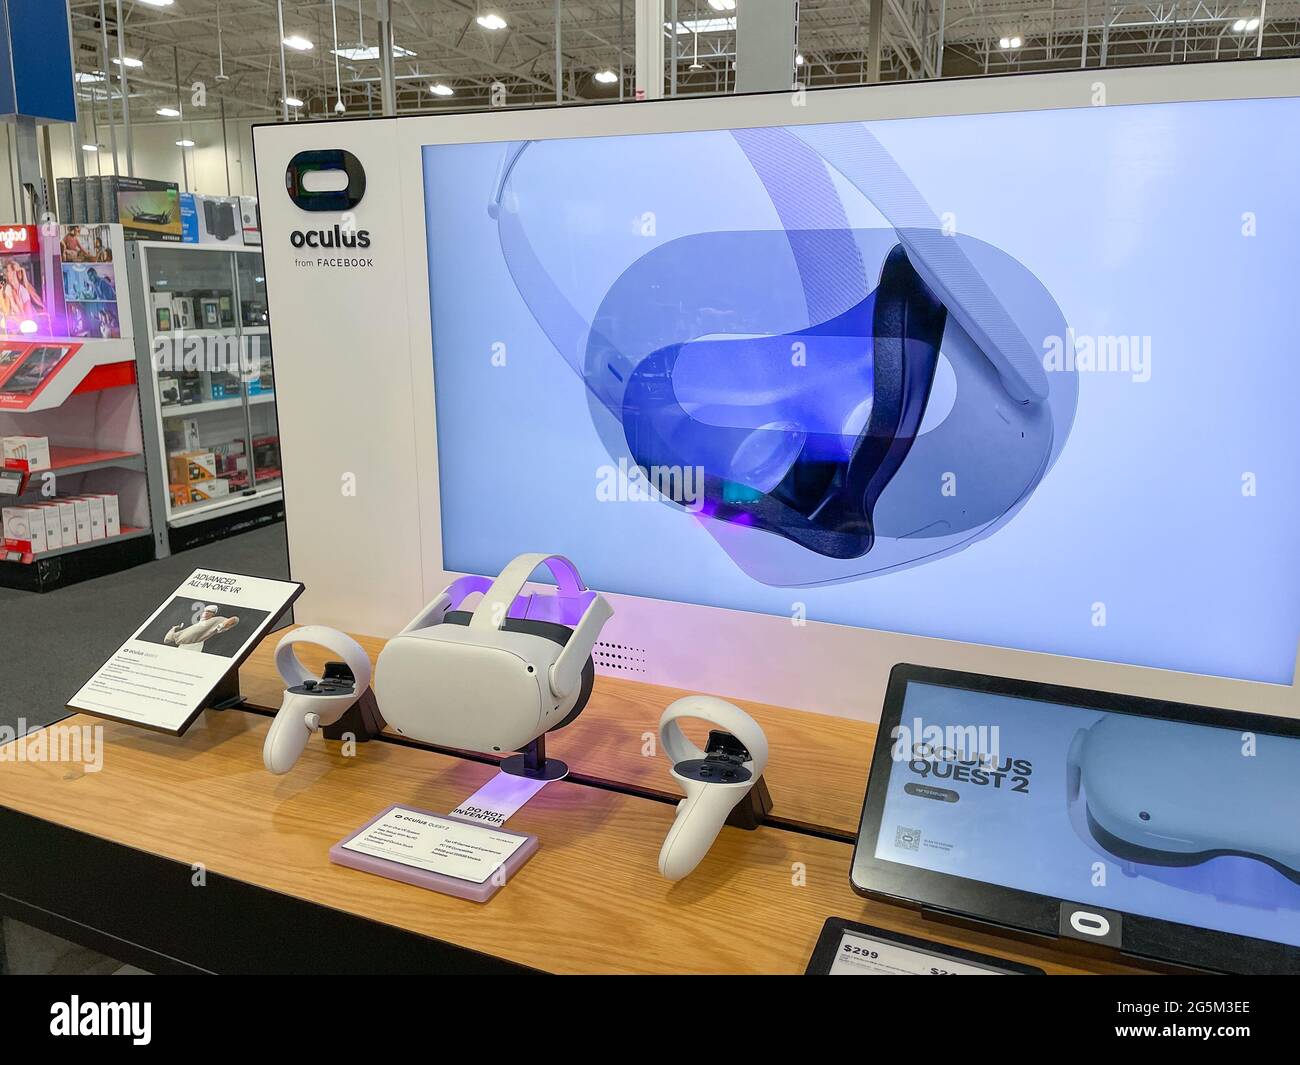 Oculus - a virtual reality console - is offered for sale at a Best Buy store. Stock Photo